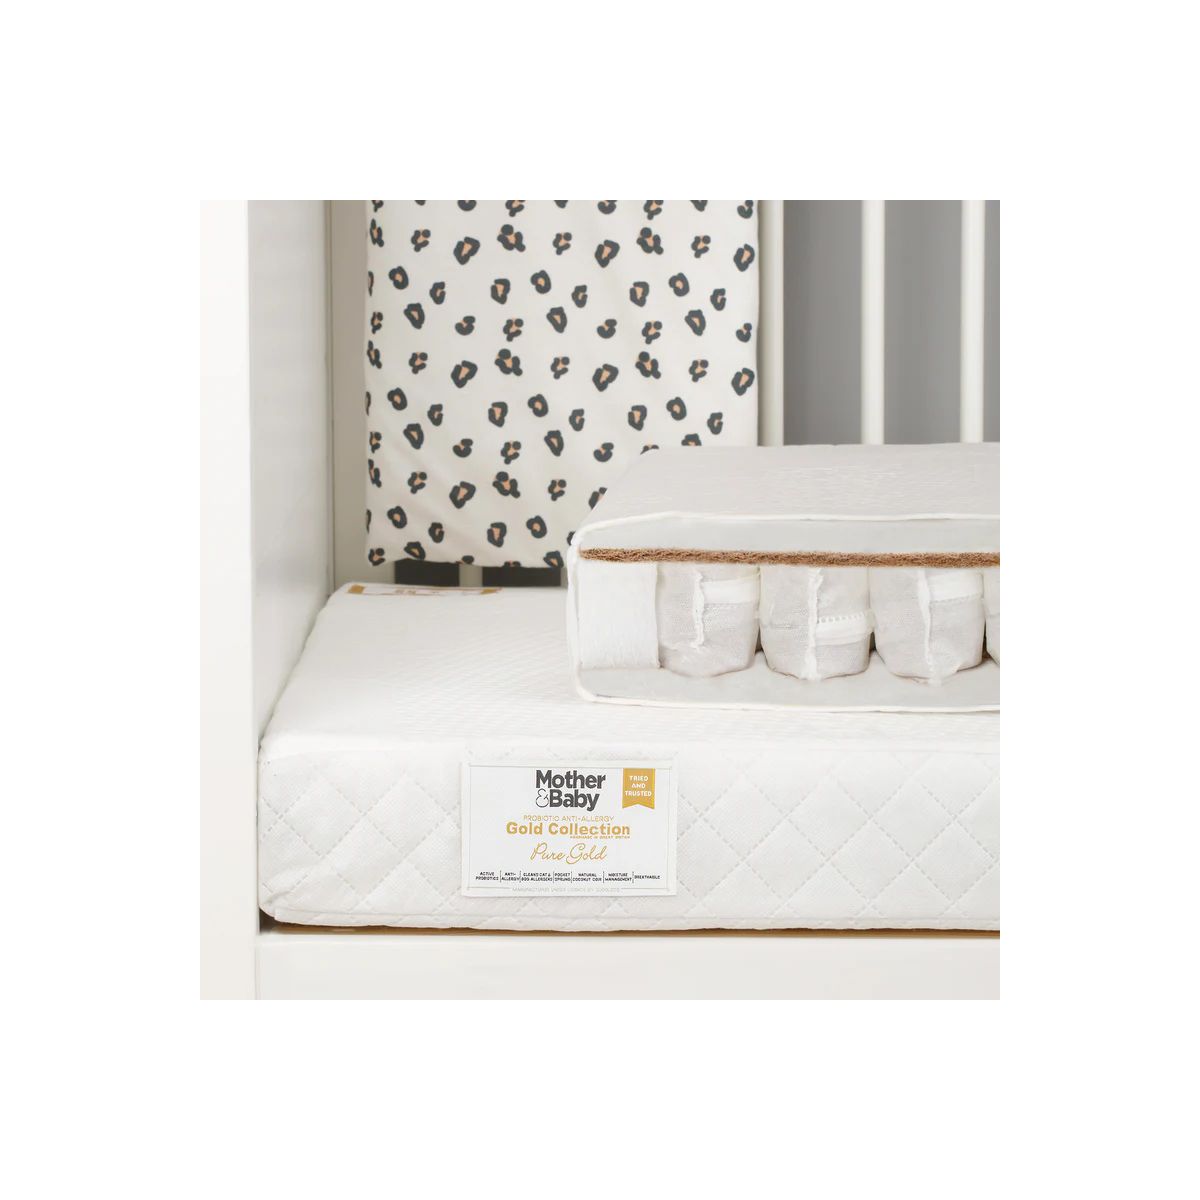 Mother & Baby Pure Gold Anti Allergy Coir Pocket Spring Cot Mattress 120x60